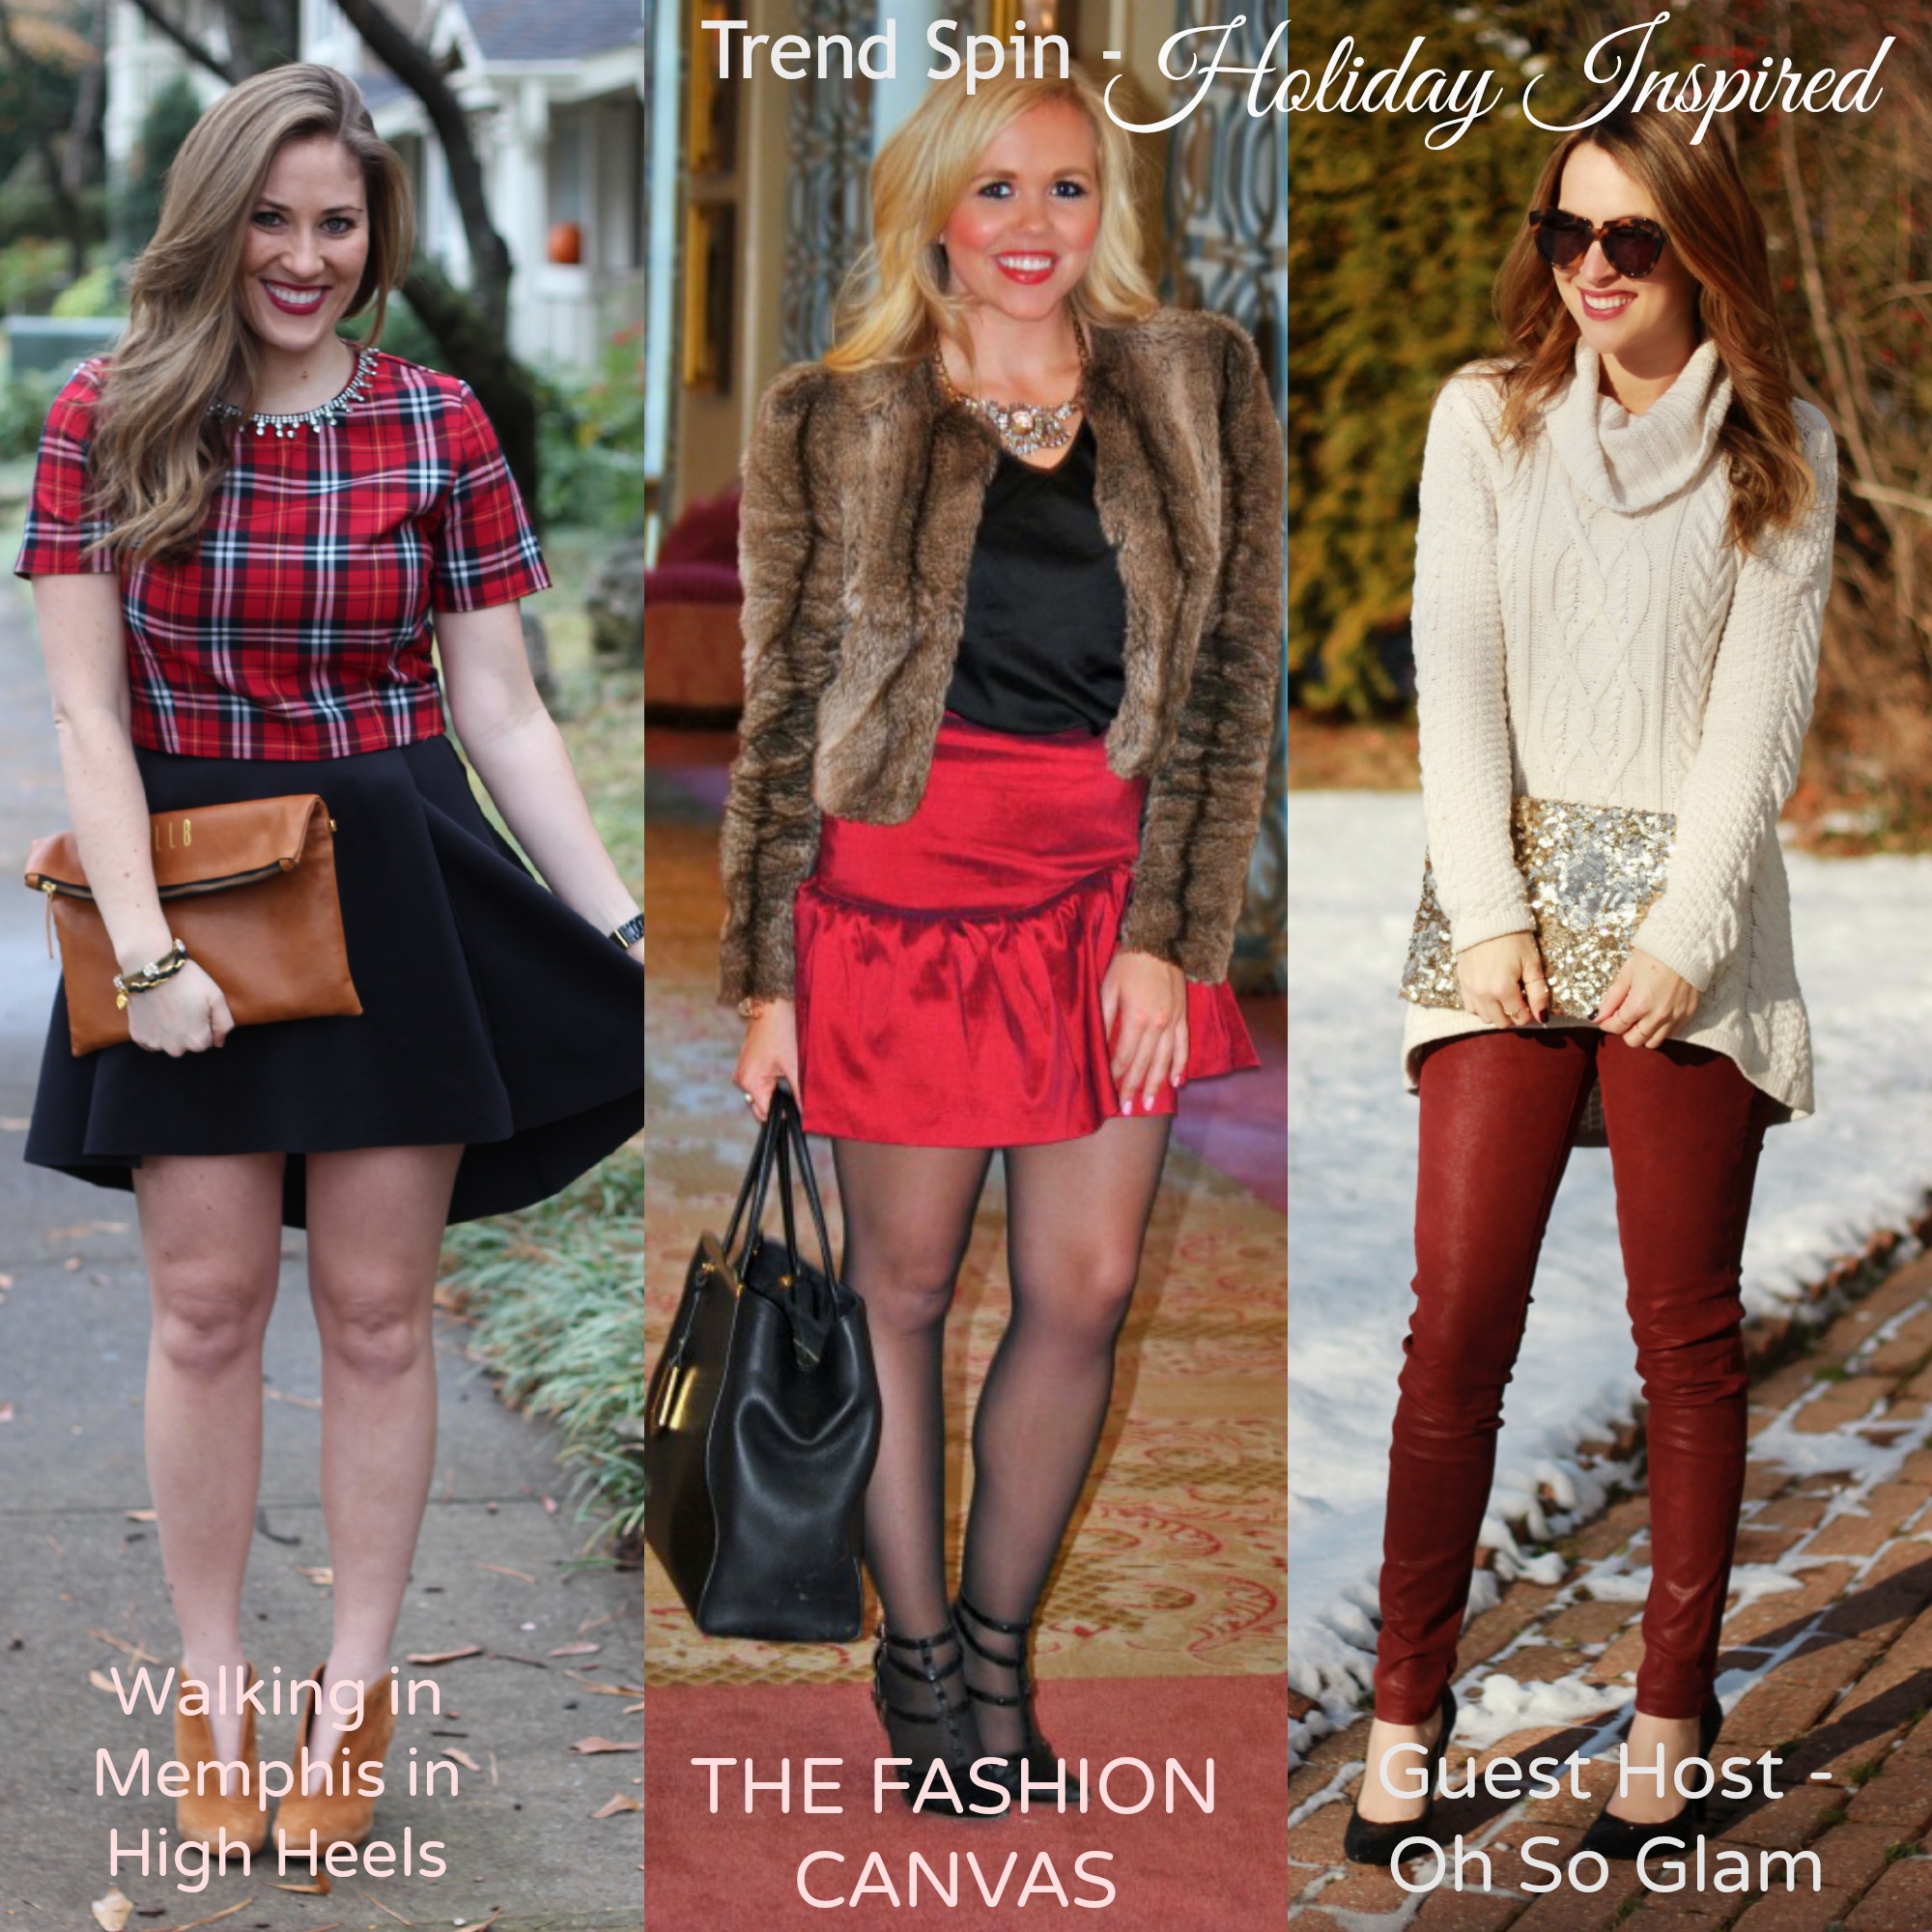 Oh So Glam: Holiday Style